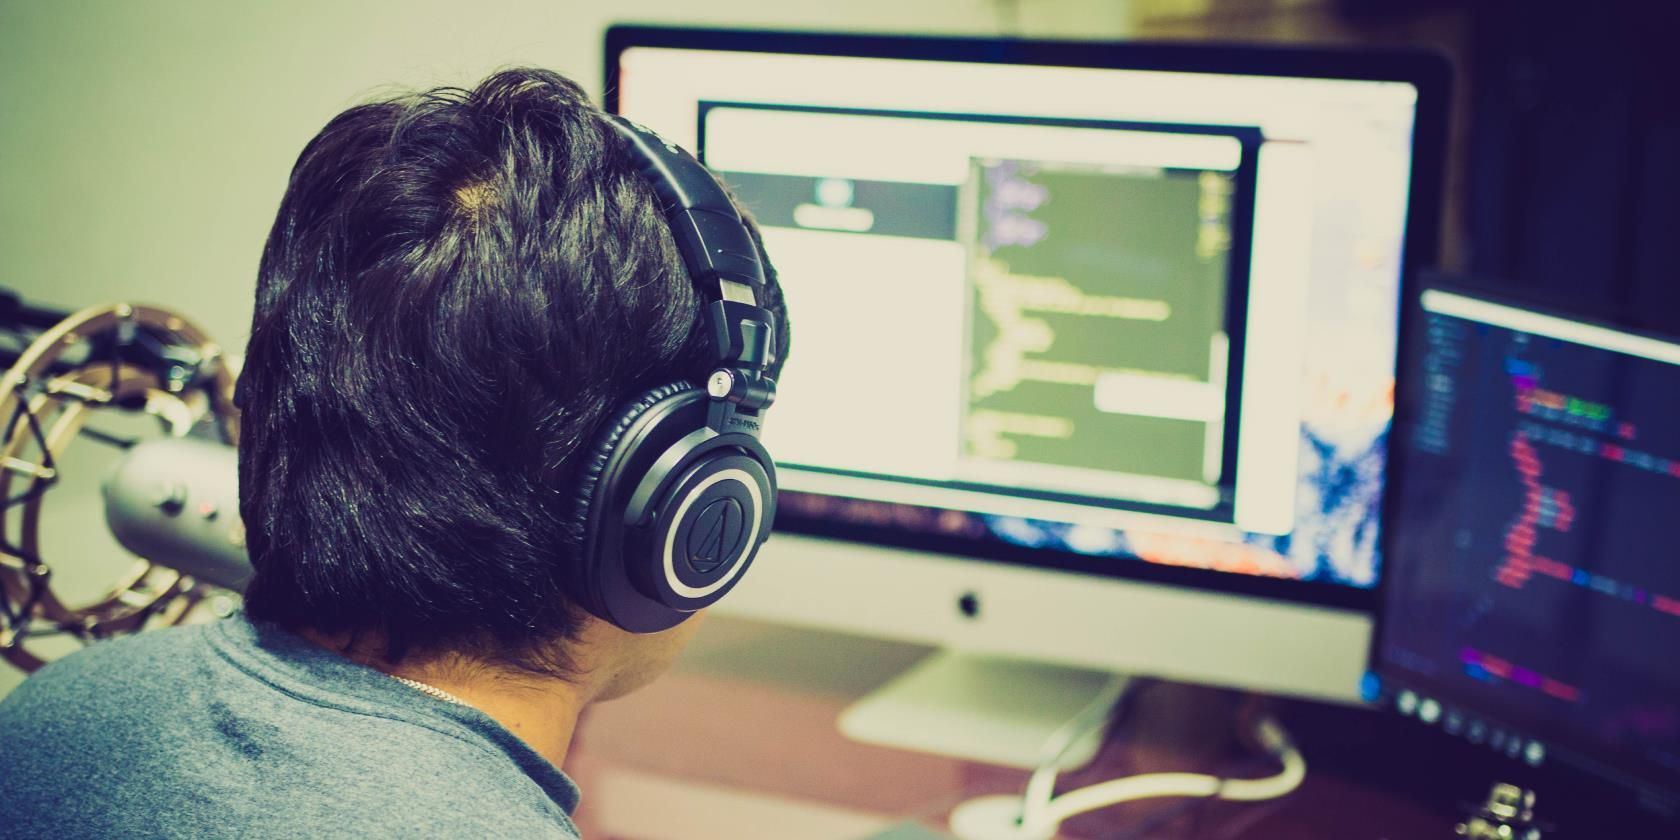 Best free Game Development software to create your own games